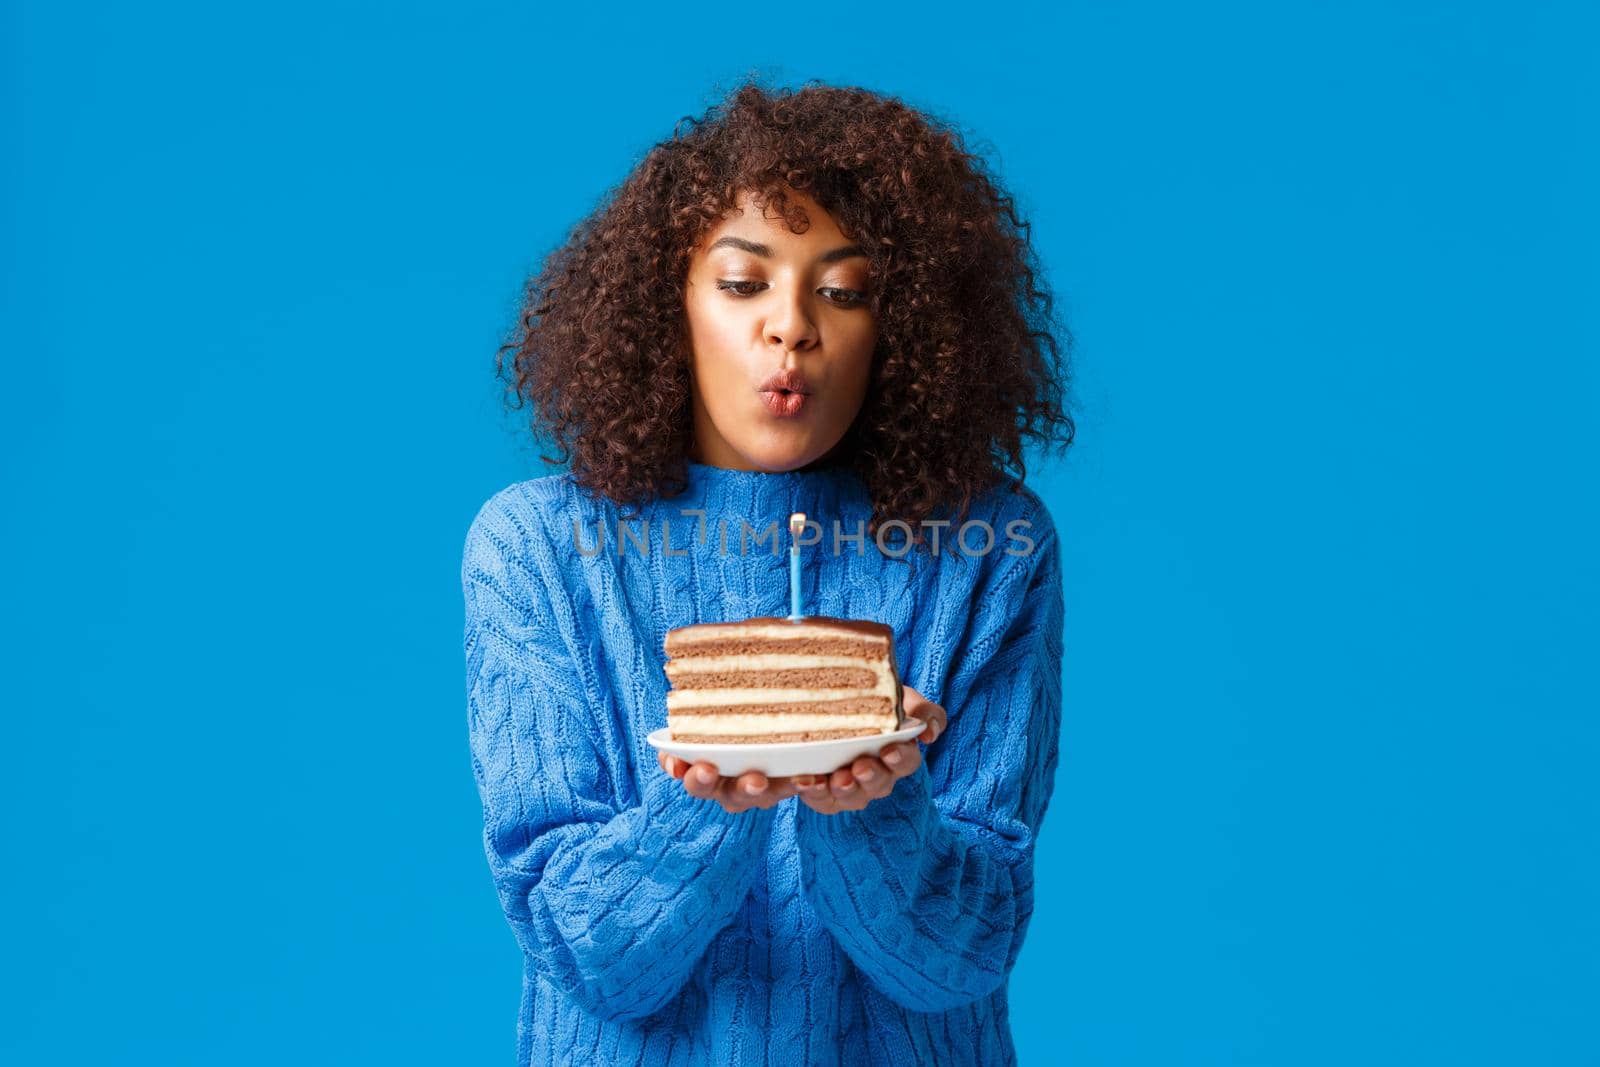 Woman celebrating her birthday on winter in family circle. Cute and happy african-american girl holding cake and blowing-out b-day candle smiling making wish, dreaming all come true, blue background.